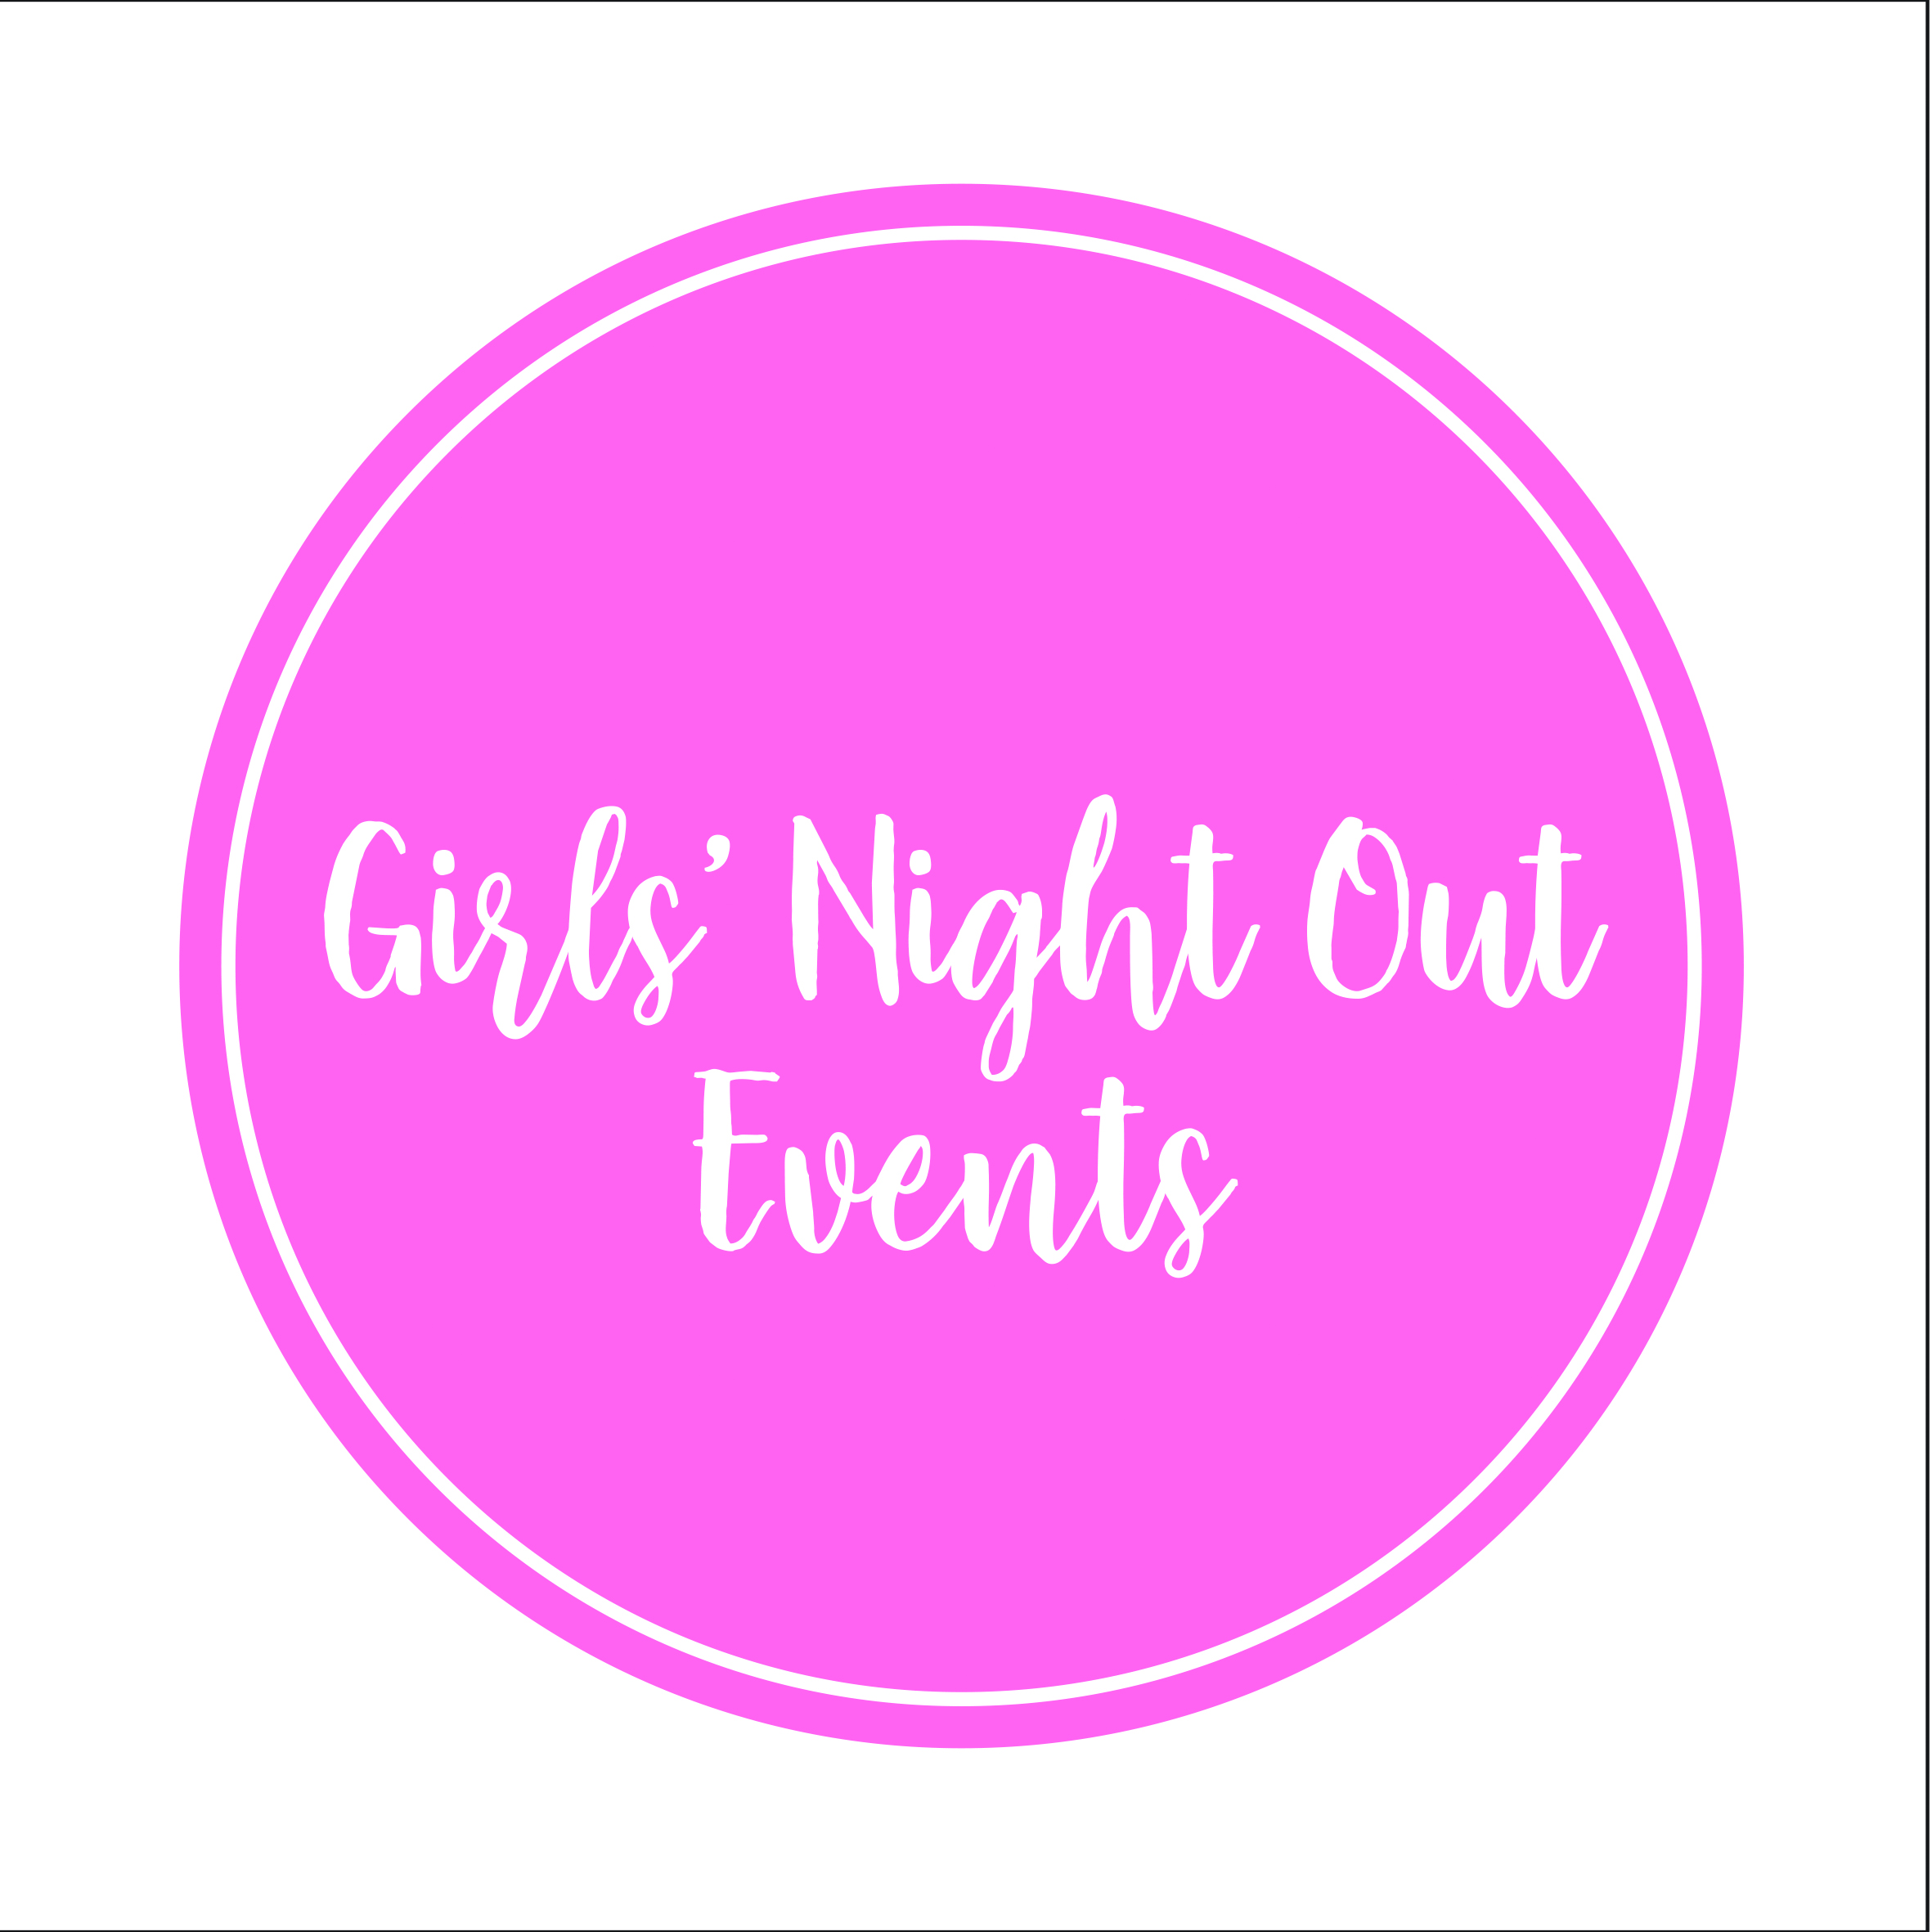 Girls' Night Out Events